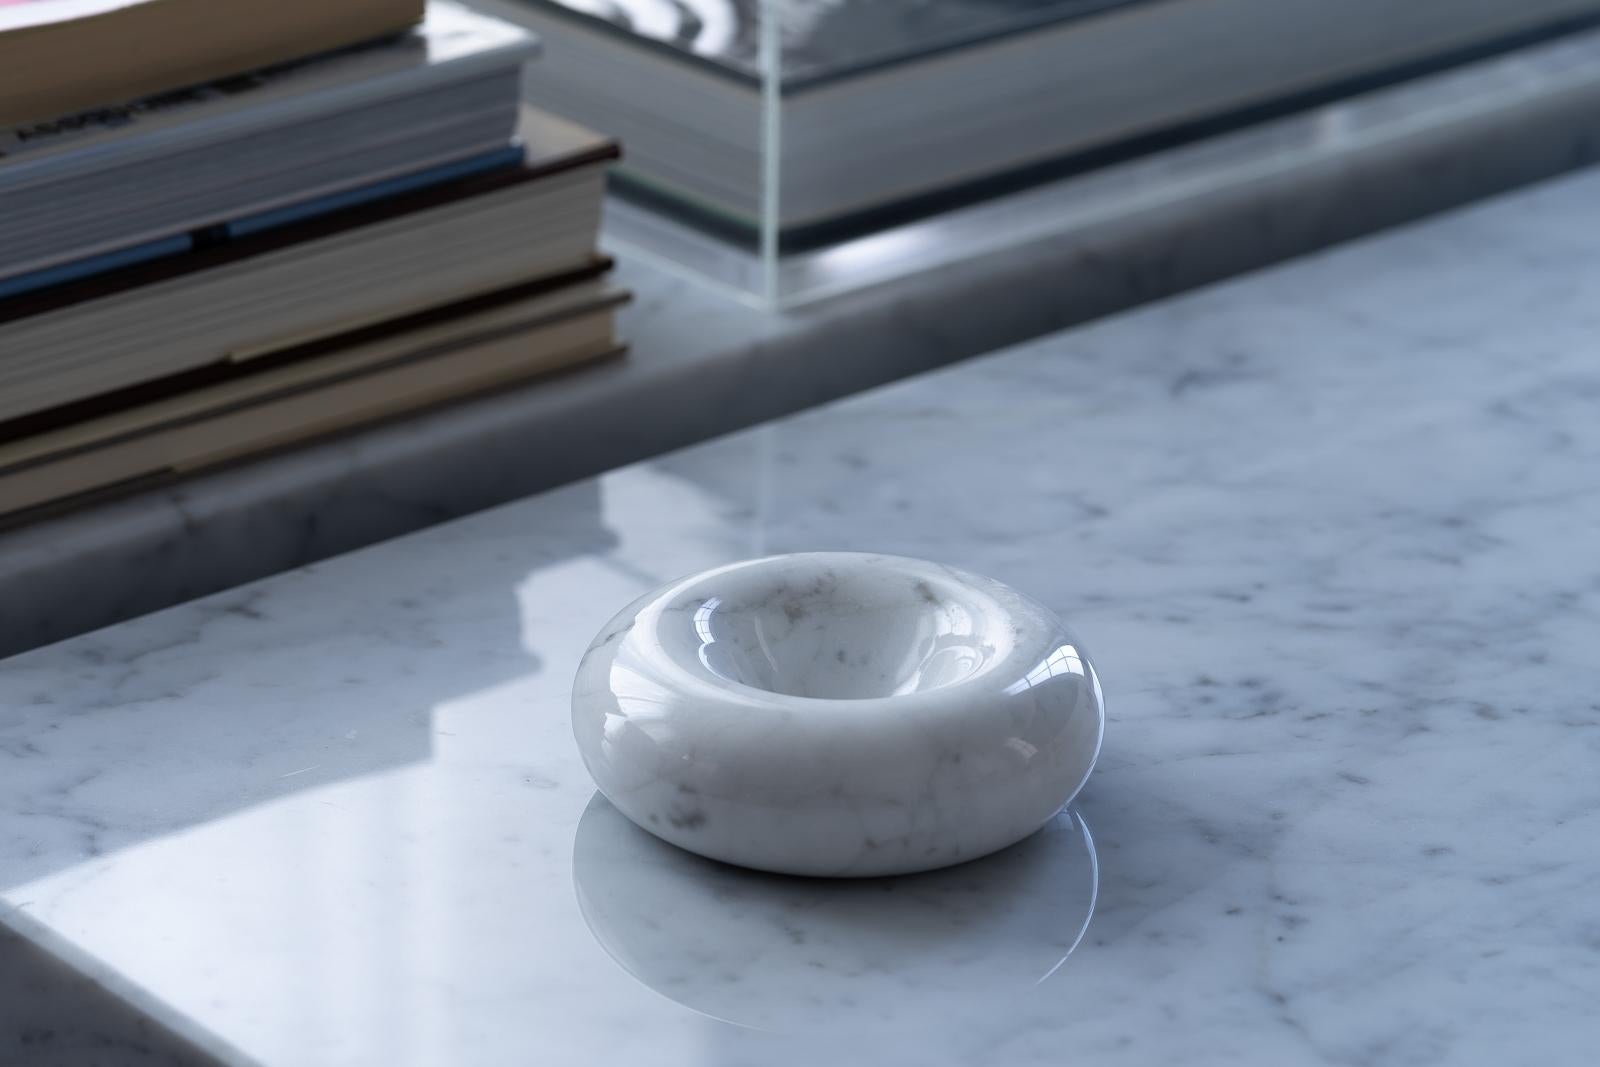 A beautifully crafted 'Conchetta' dish designed by Egidio Di Rosa and Pier Alessandro Giusti for Up & Up in 1971. Founded in 1969, Up & Up brought modern forms and manufacturing to marble and stone while working with the preeminent architects and